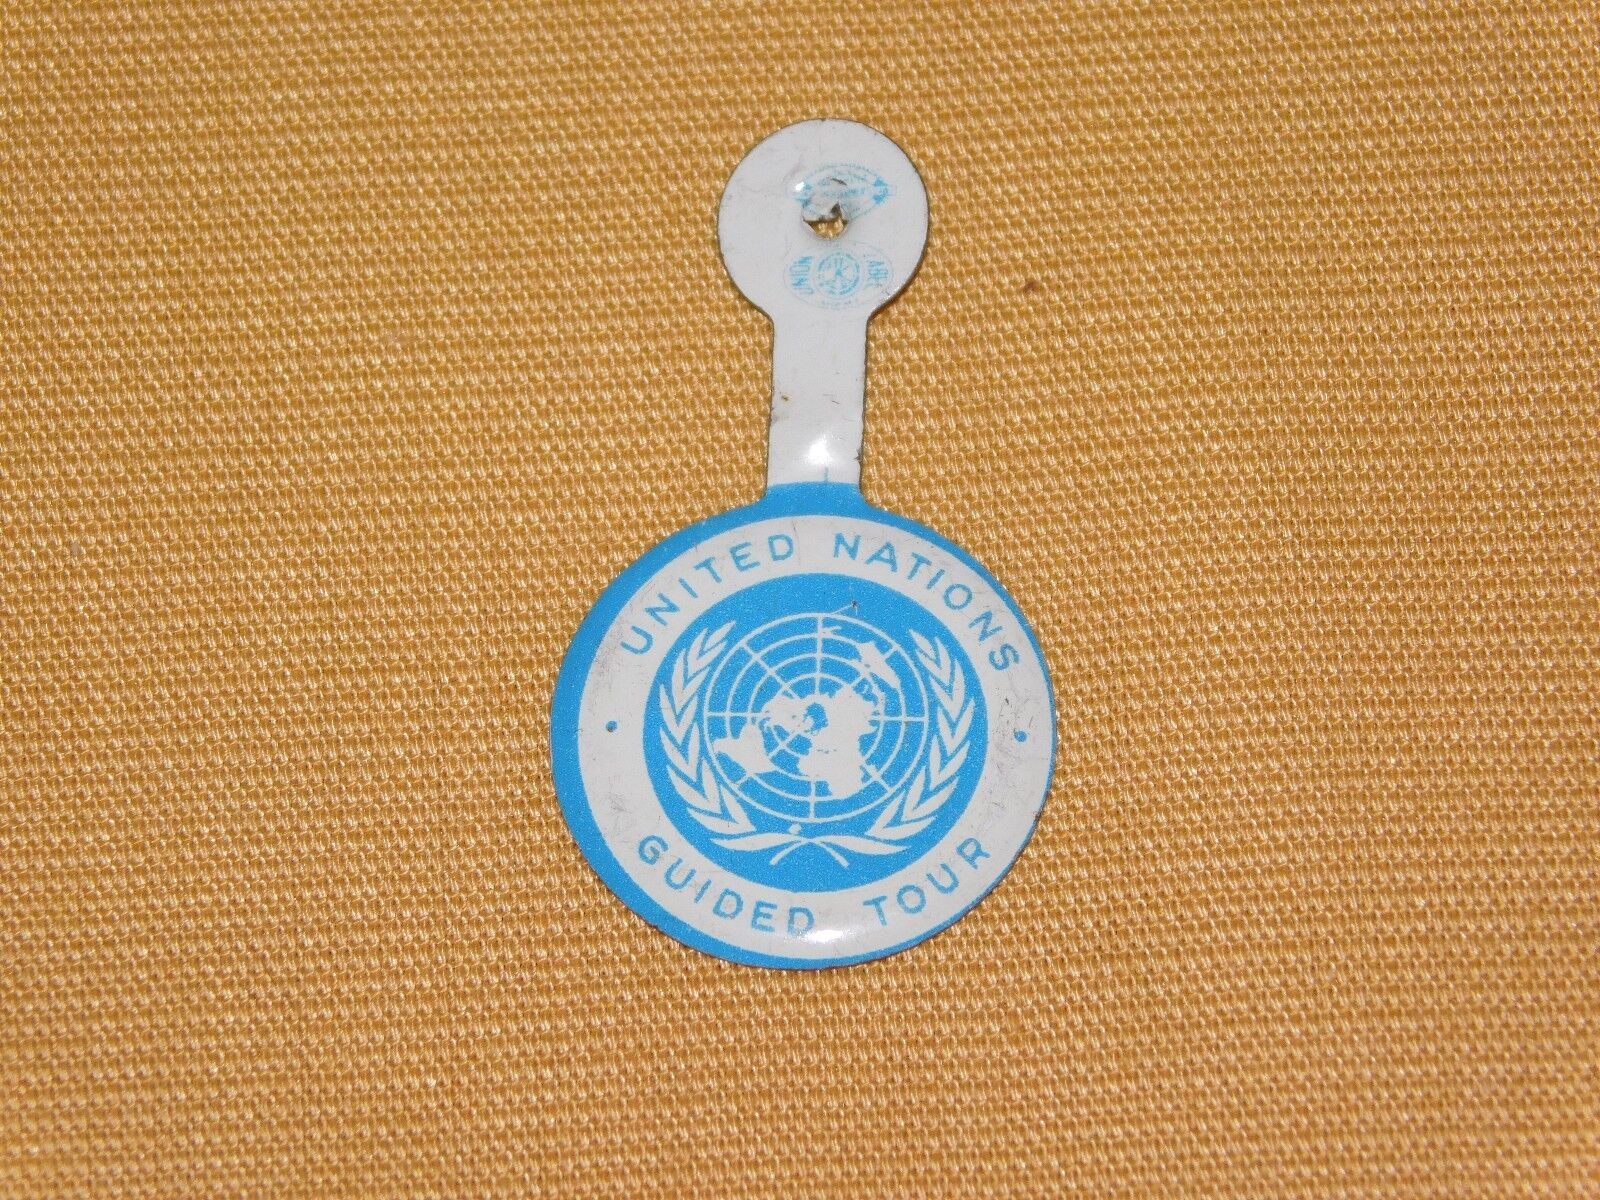 VINTAGE UNITED NATIONS NYC NEW YORK CITY GUIDED TOUR FOLD TOP OVER  BUTTON